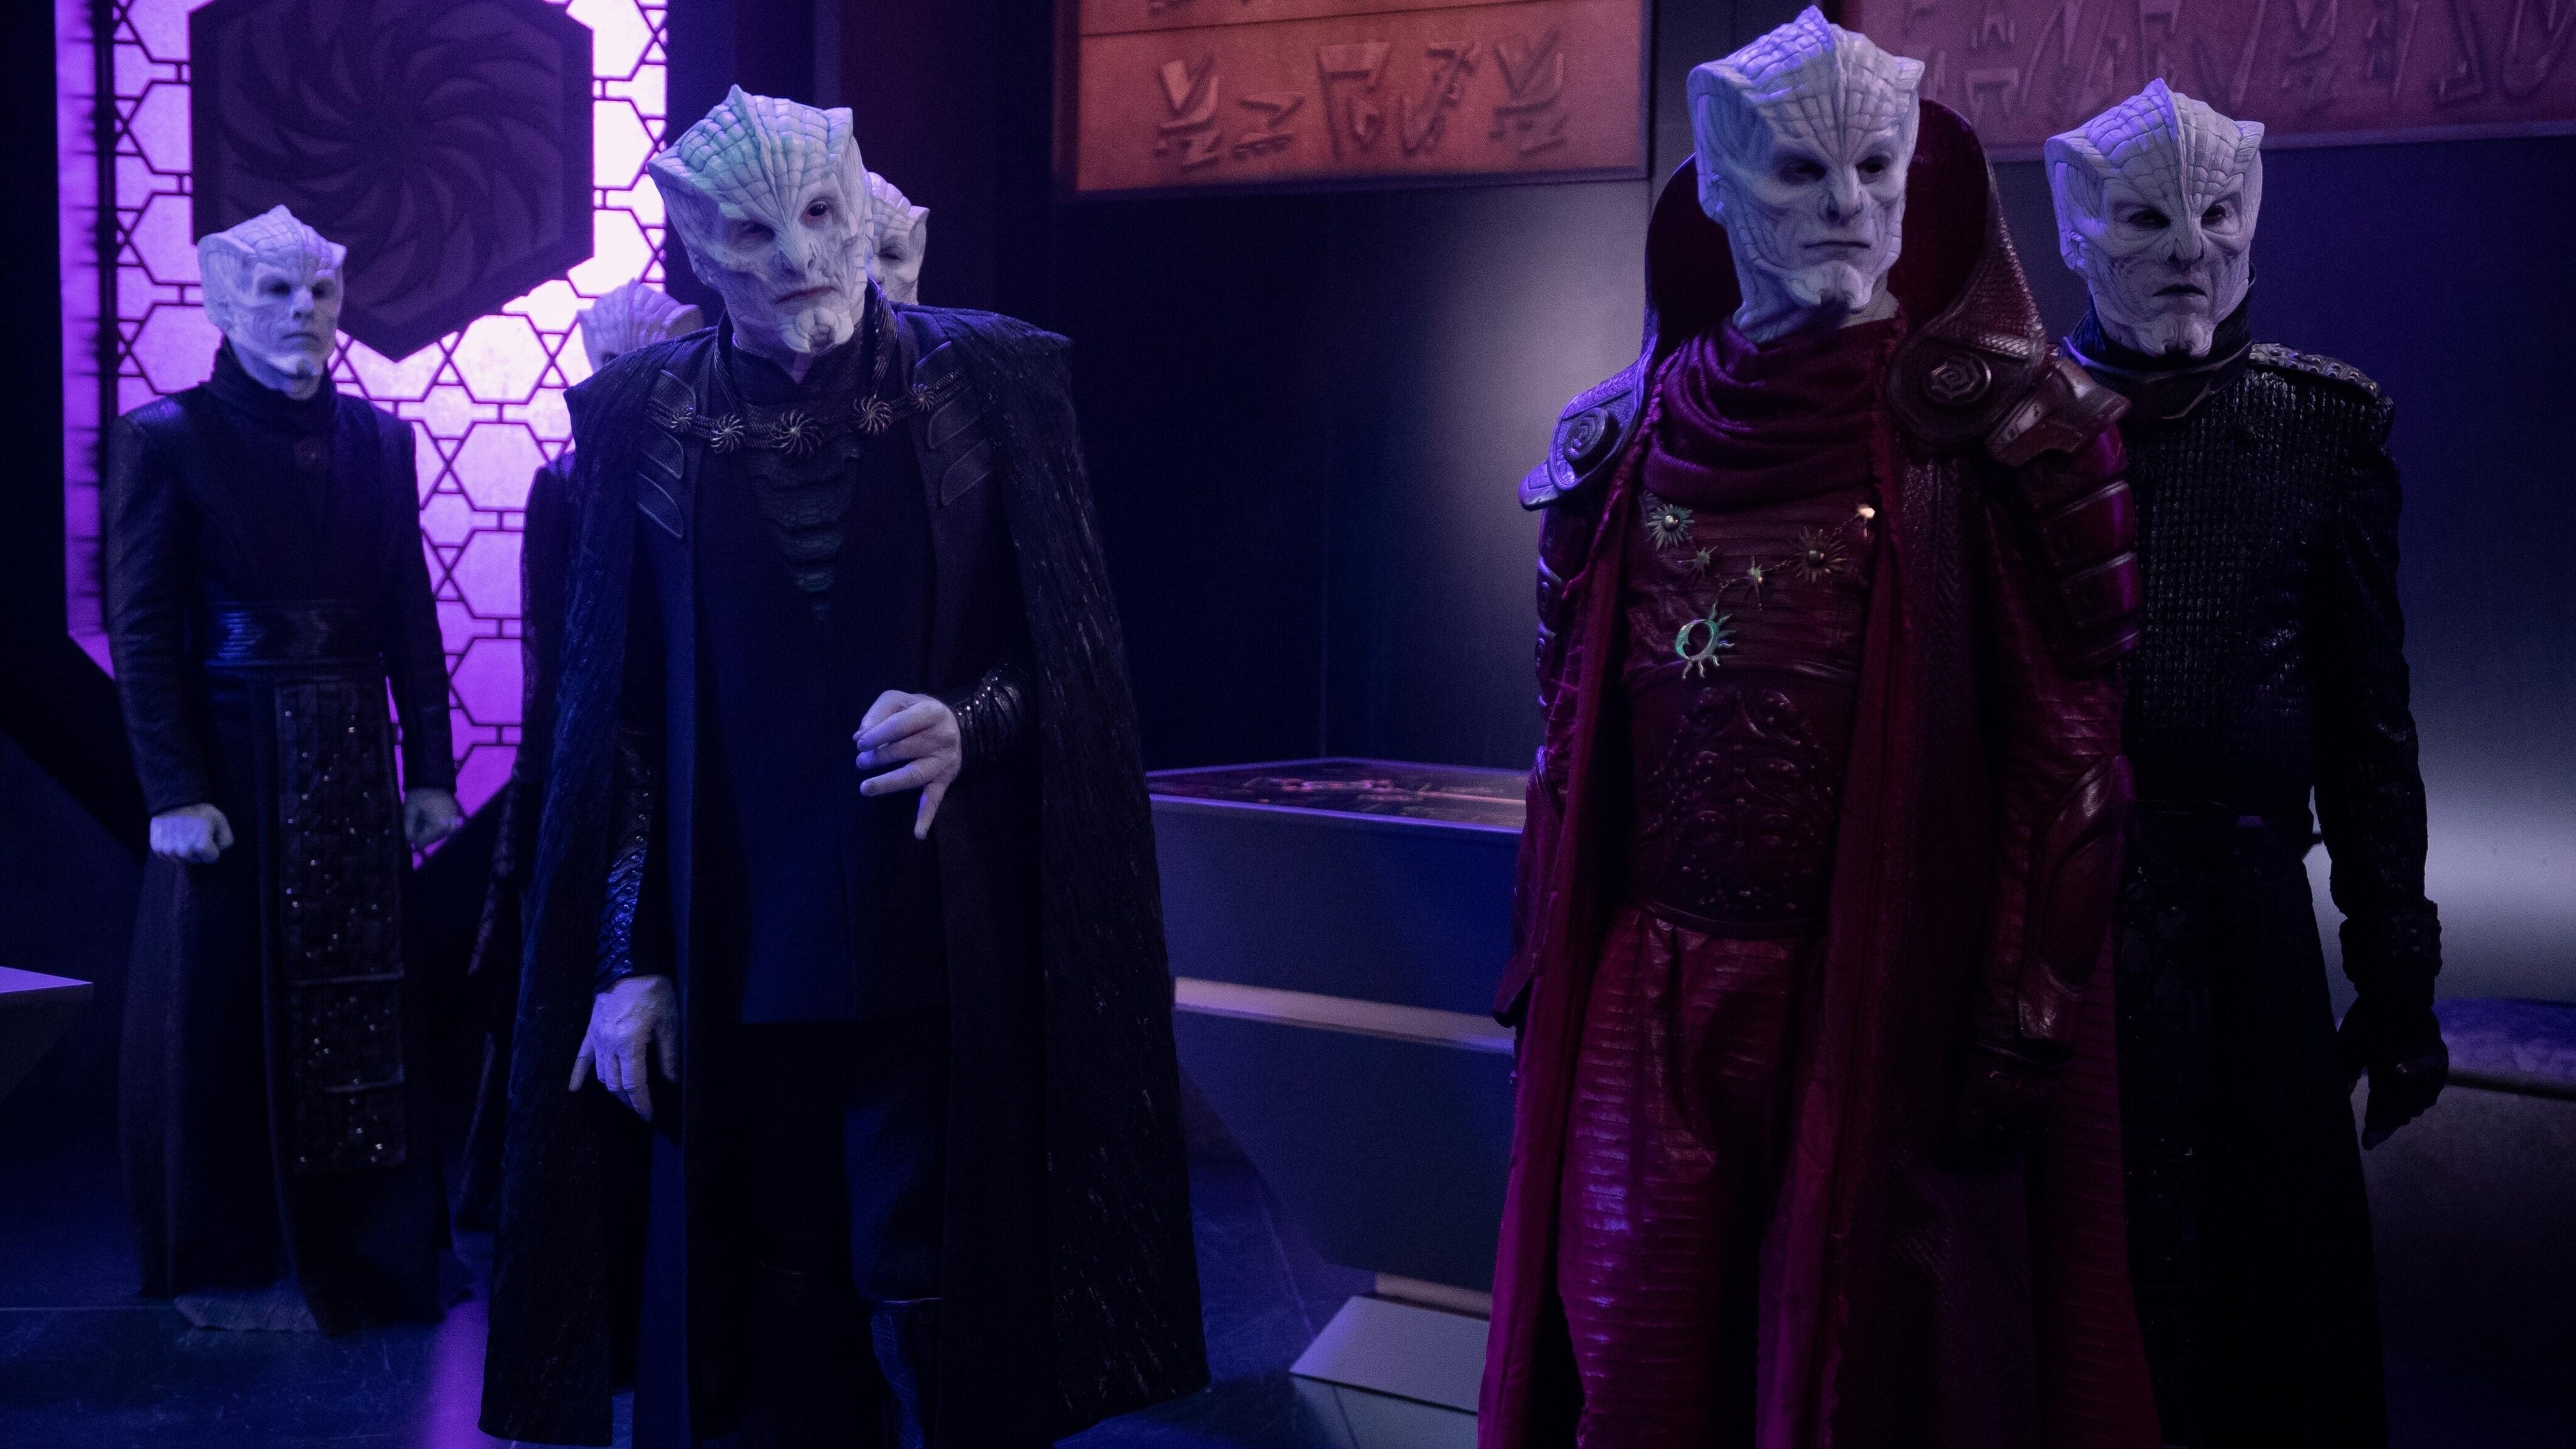 The Orville: New Horizons -- “Gently Falling Rain” - Episode 304 -- The Orville crew leads a Union delegation to sign a peace treaty with the Krill. Ambassador K.T.Z.(John Fleck), shown. (Photo by: Kevin Estrada/Hulu)